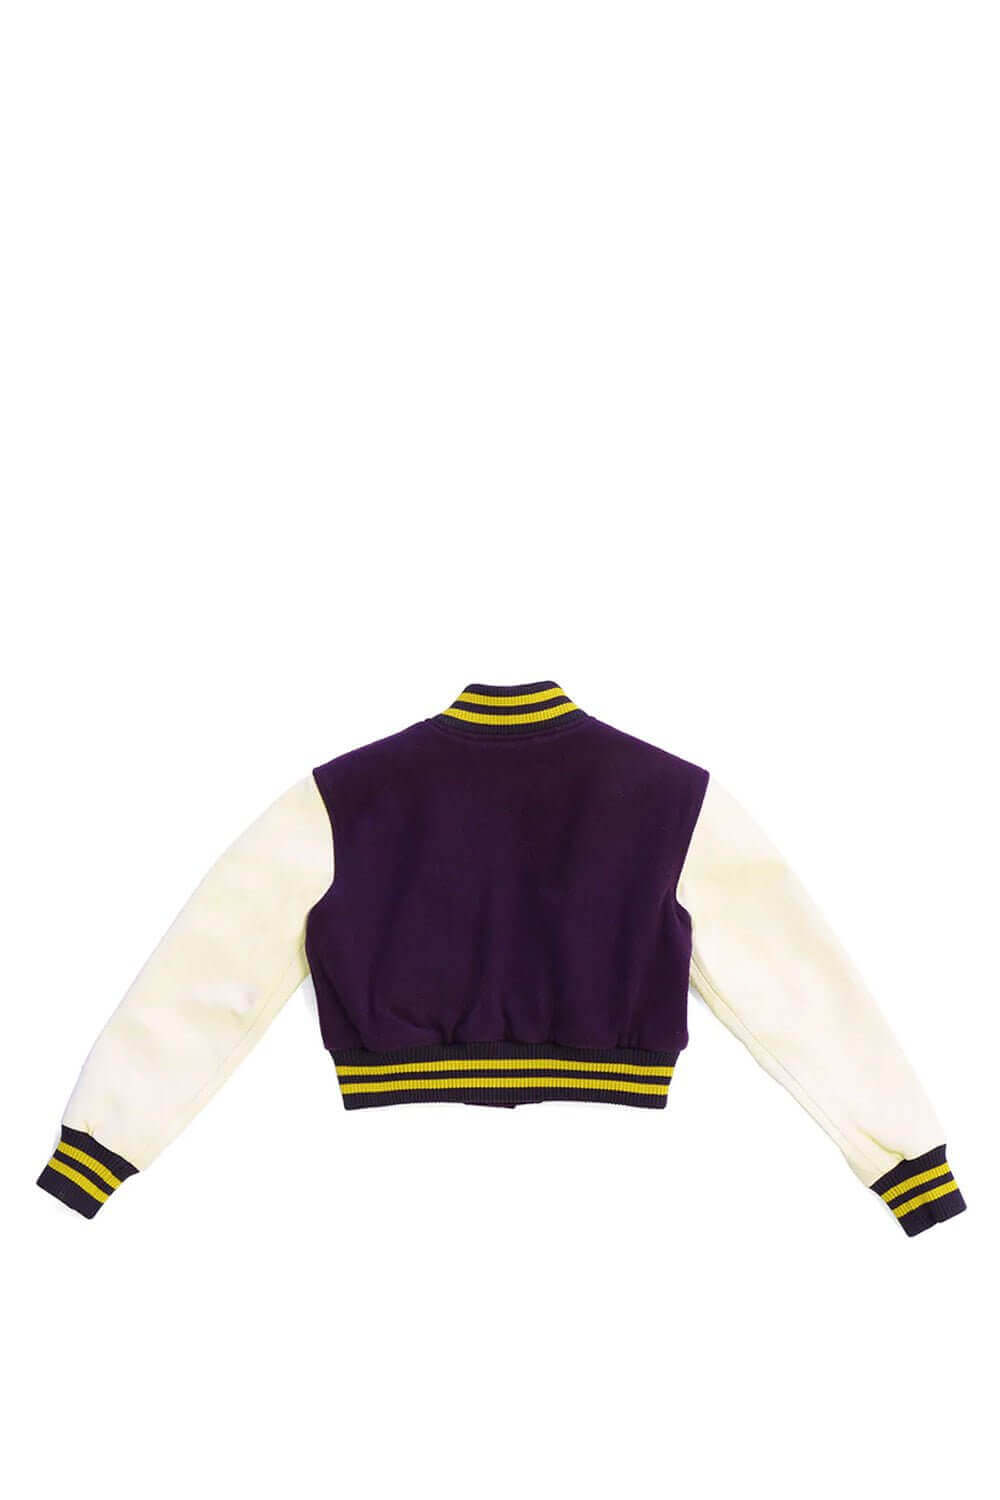 COLLEGE - EMBROIDERY WOMAN Varsity wool & leather bomber jacket. Front button closure, ribbed collar, cuffs and hem. Embroidered details. Two side pockets. Main body composition: 70% Wool, 30% Acrylic; sleeves: 100% Leather HTC LOS ANGELES